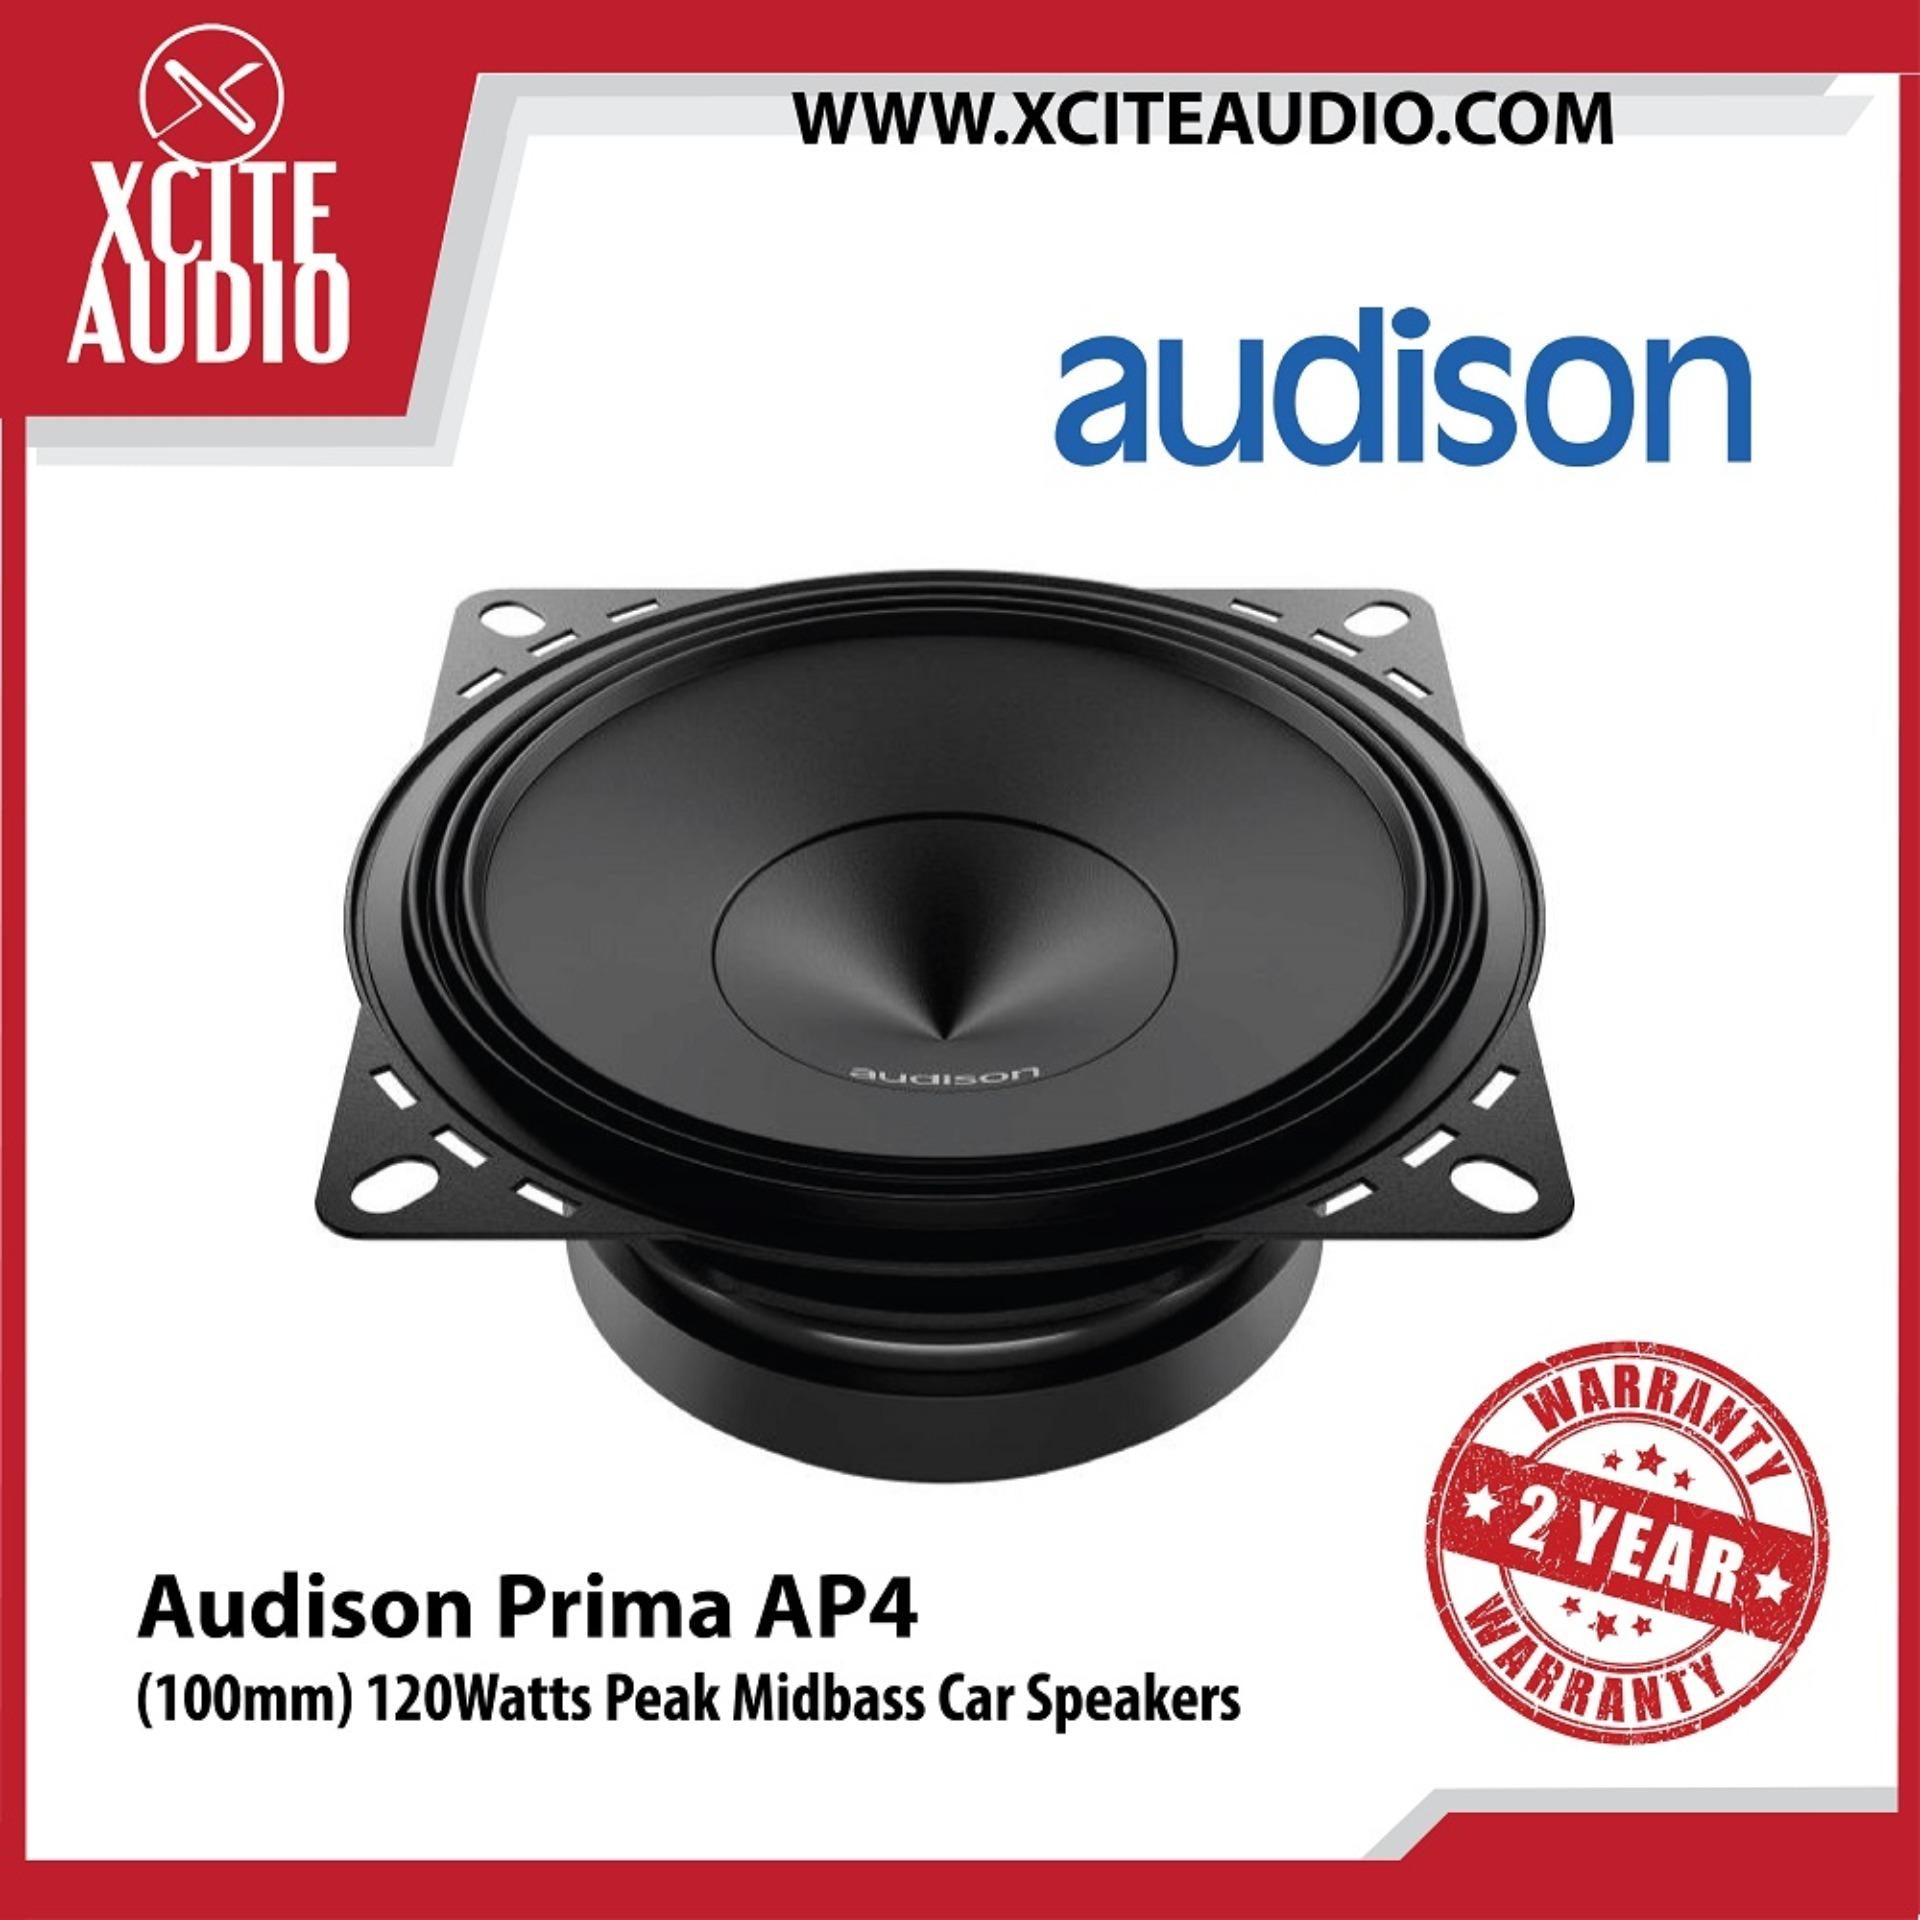 Audison Prima AP 4 Midbass with extended frequency response 120w Peak